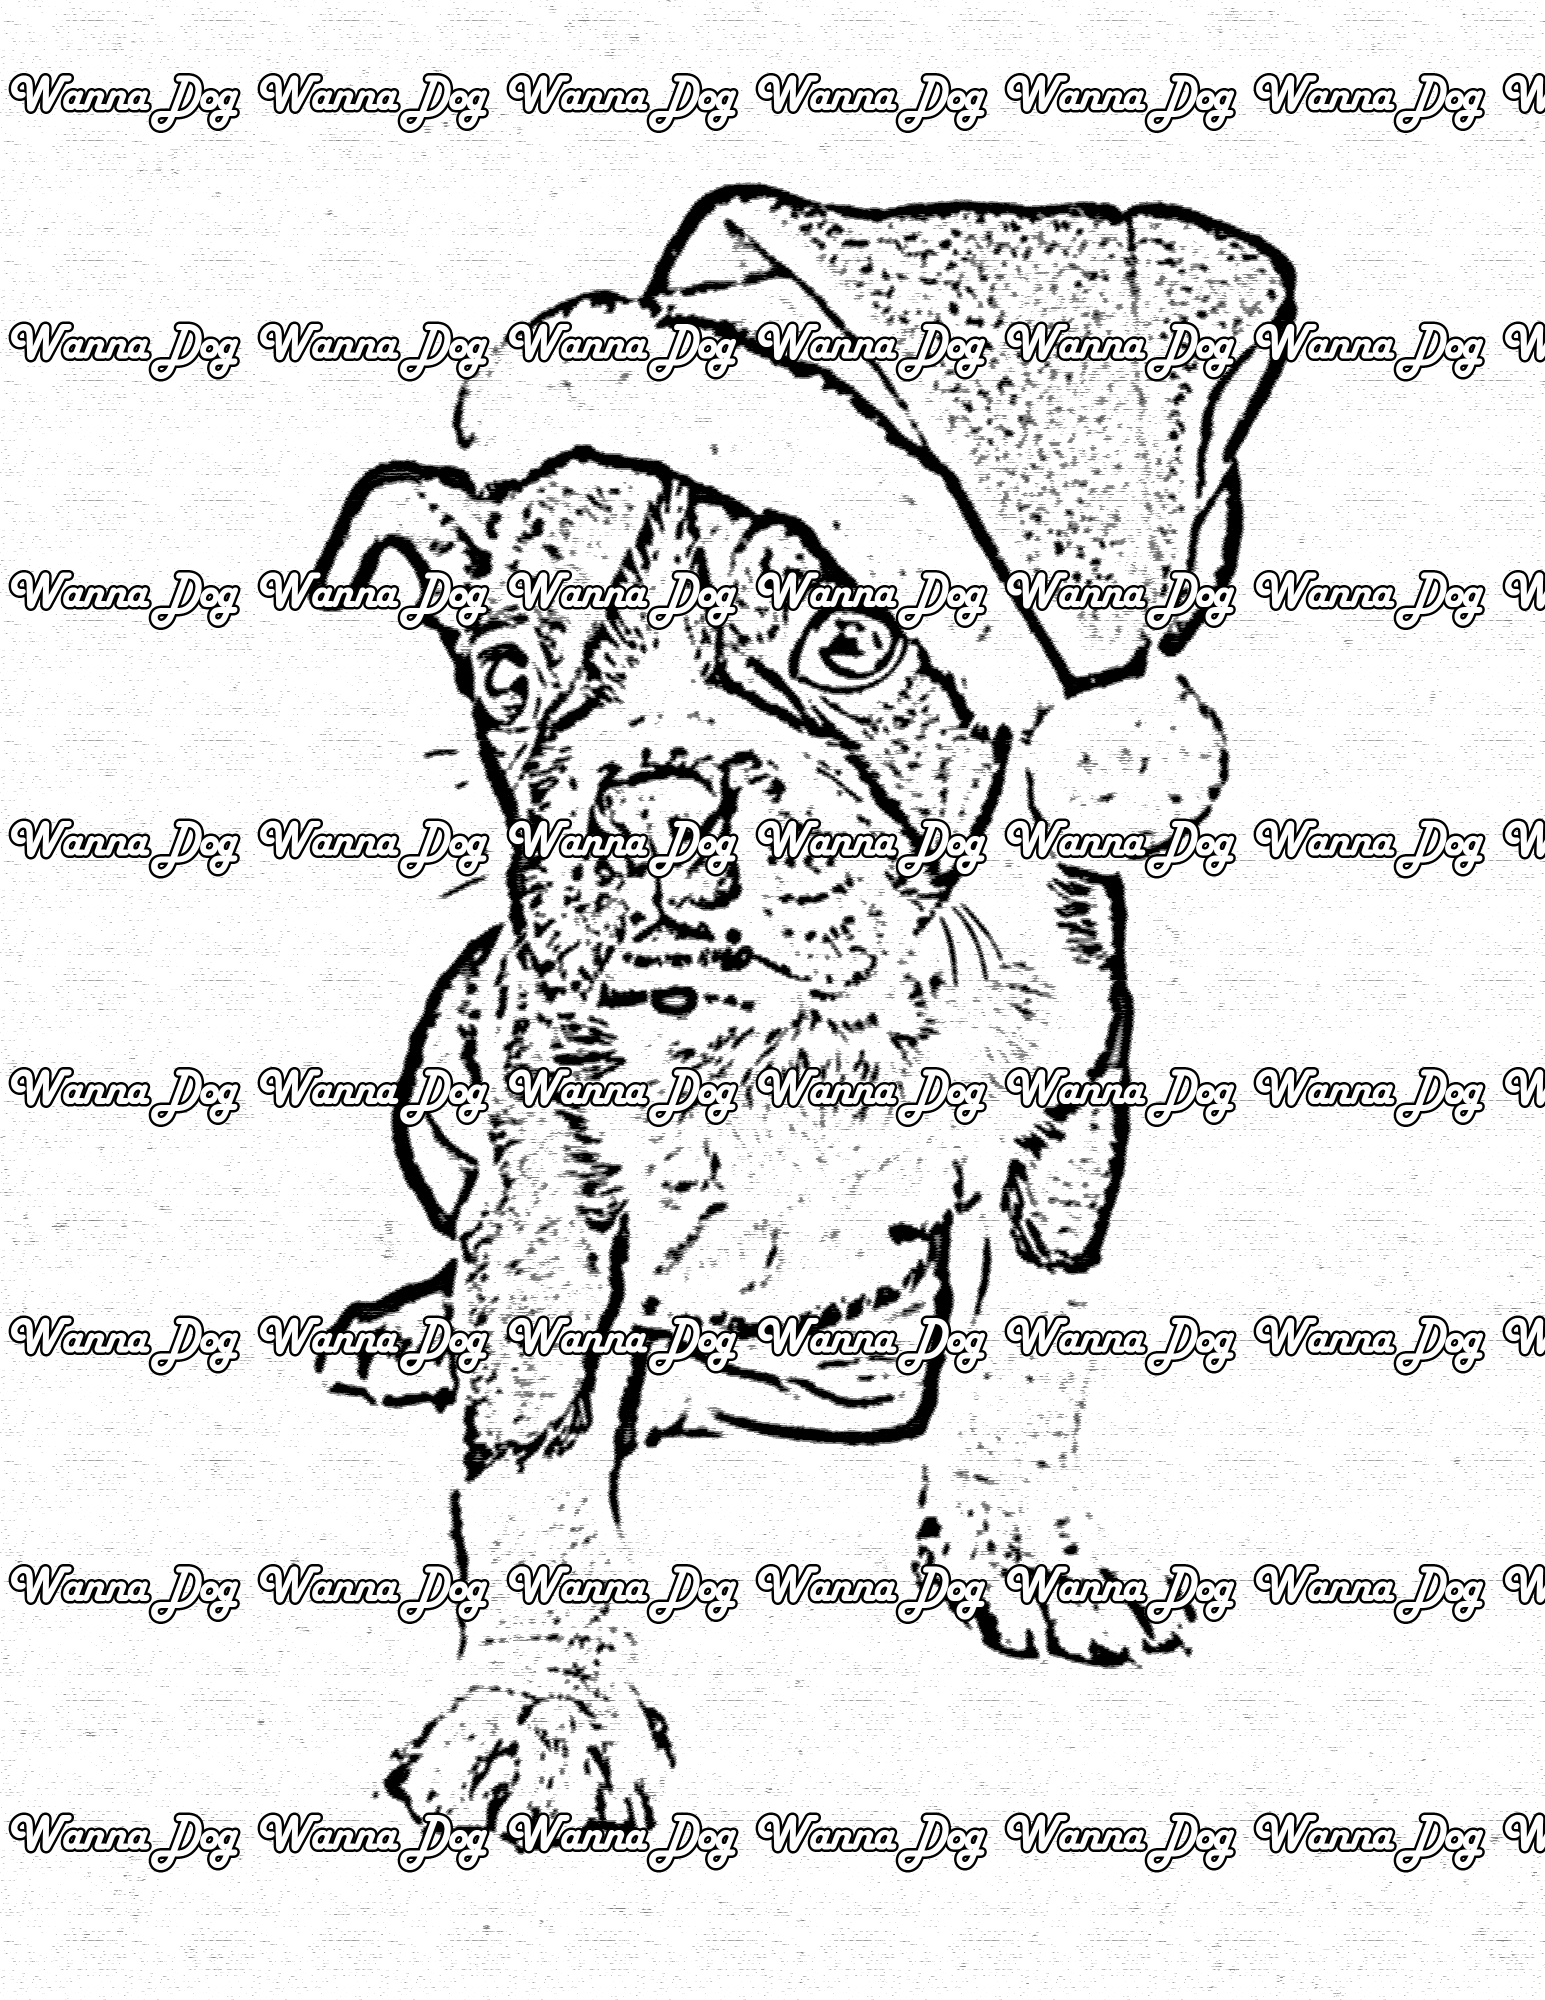 Boston Terrier Coloring Page of a Boston Terrier wearing a santa hat